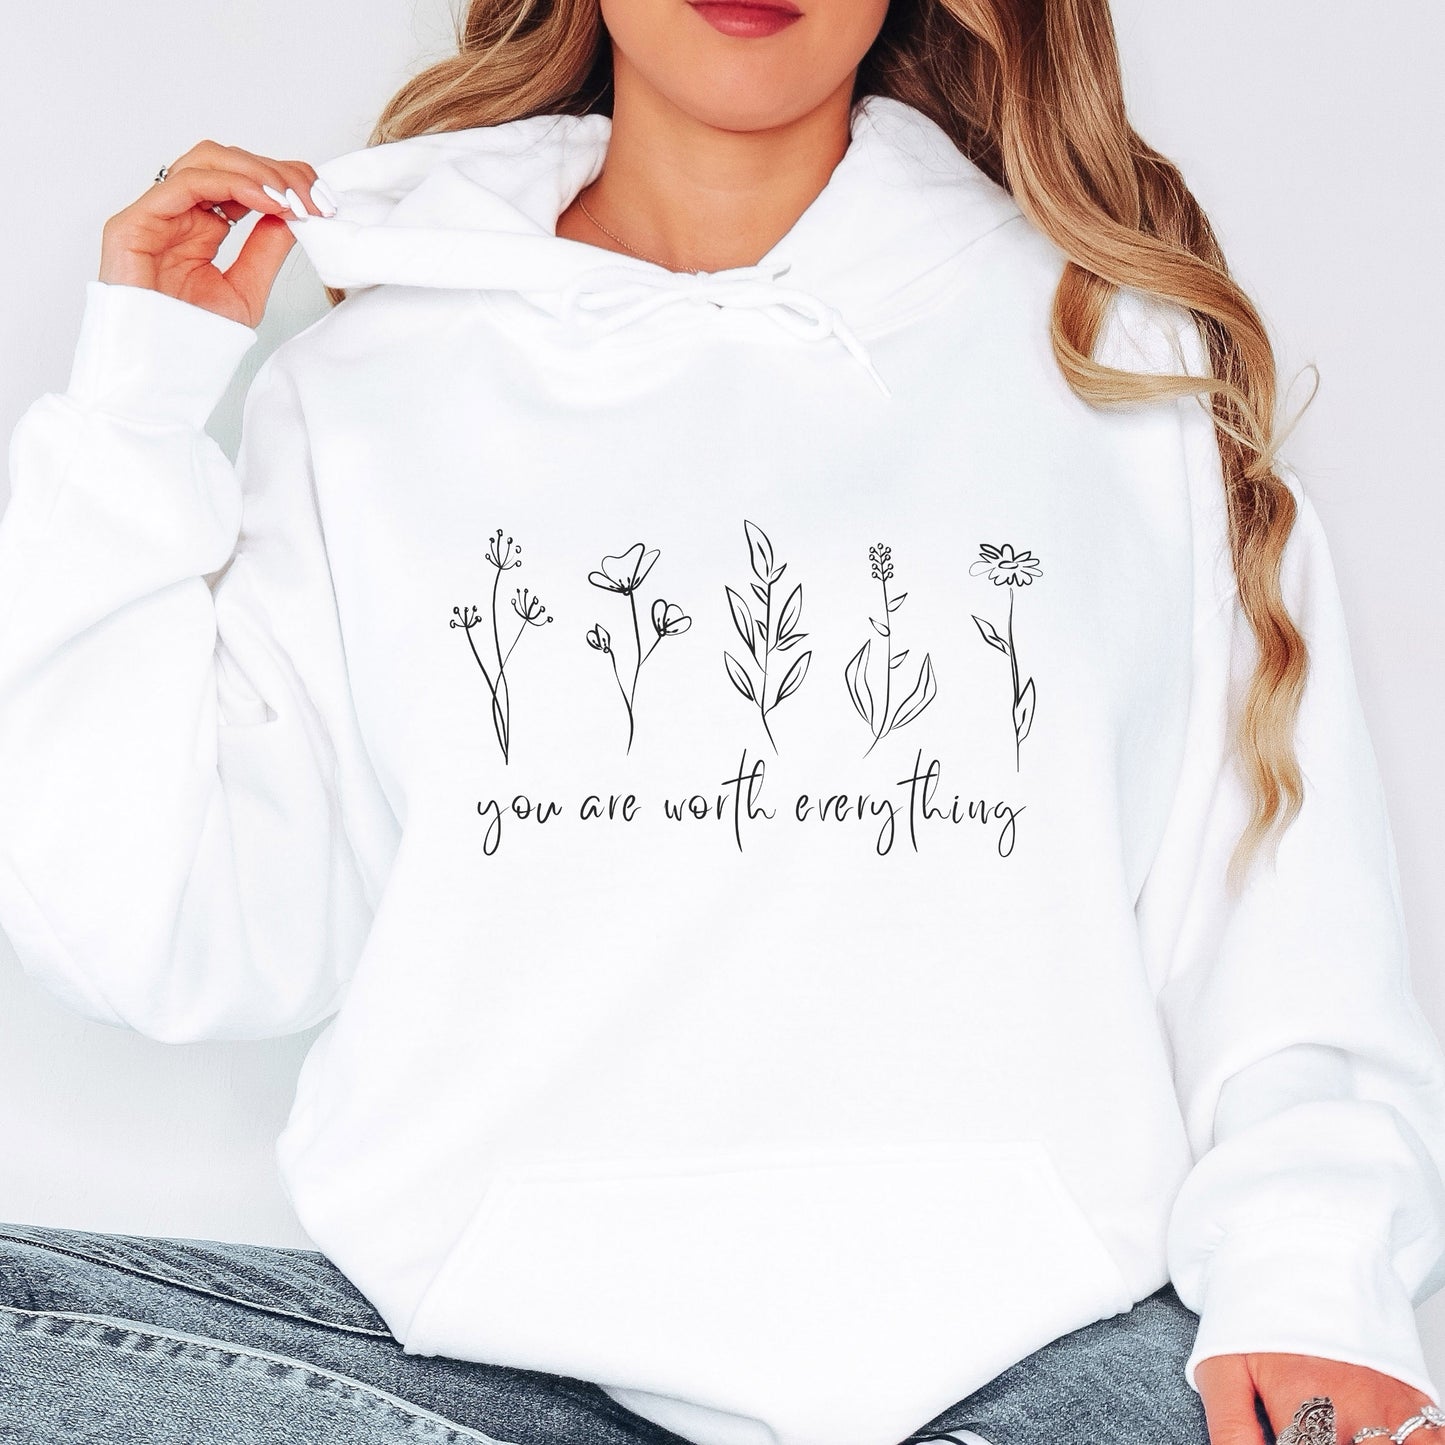 Adorned with beautiful wildflowers graphic and the empowering affirmation message You Are Worth Everything, this Tshirt is a wearable reminder of your inherent value worth and uniqueness.